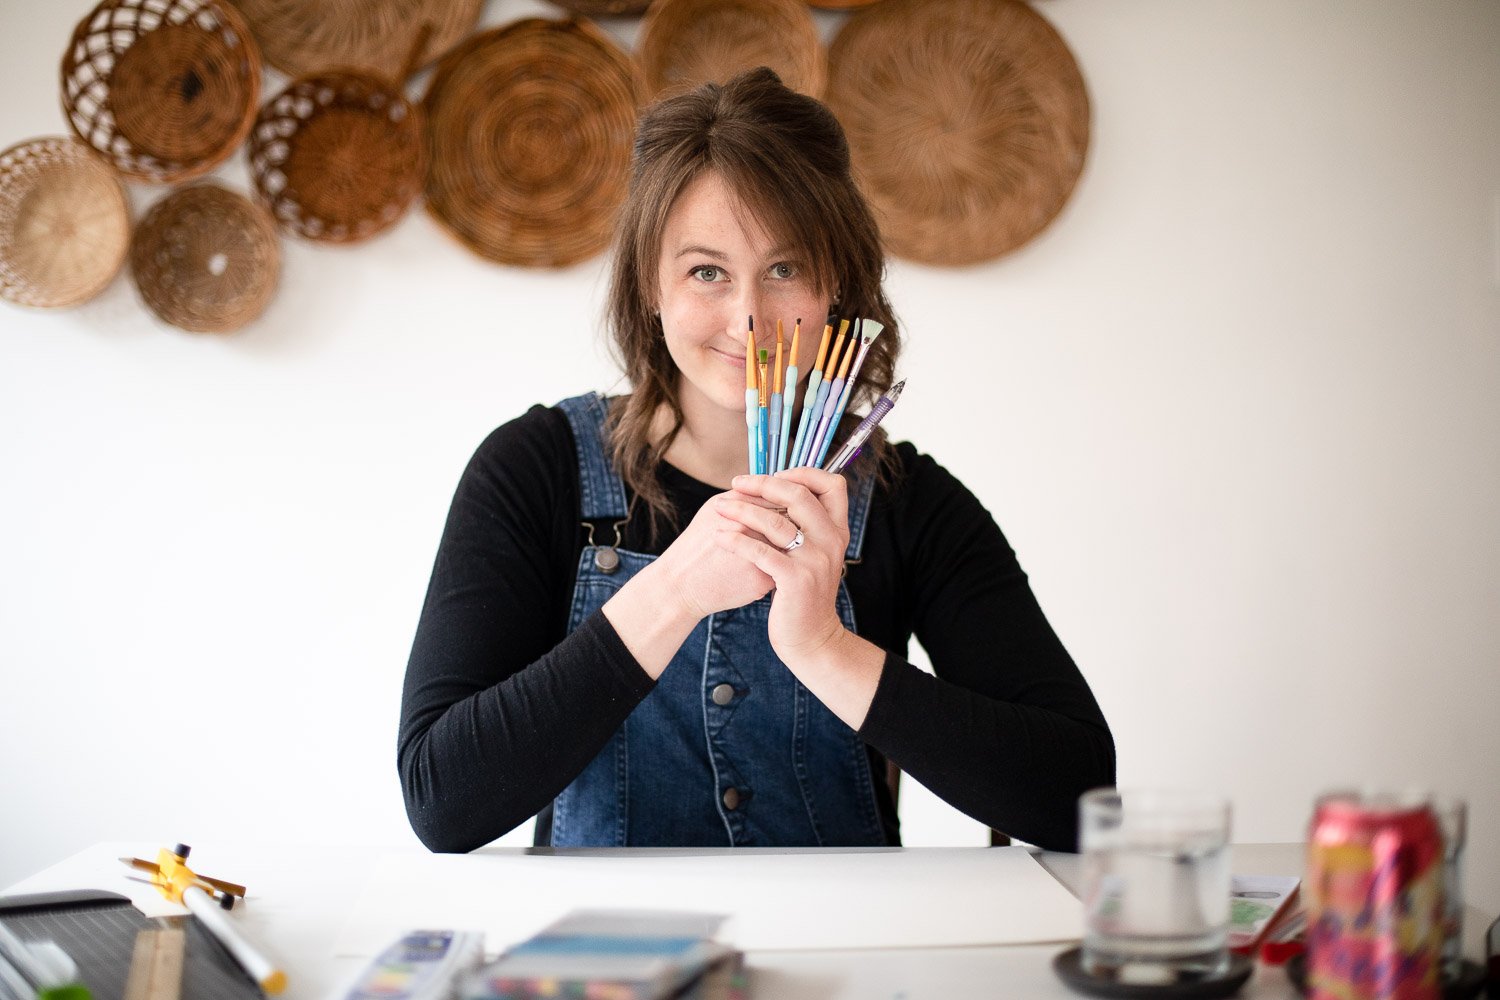 Alison Kroening holding up watercolor paintbrushes